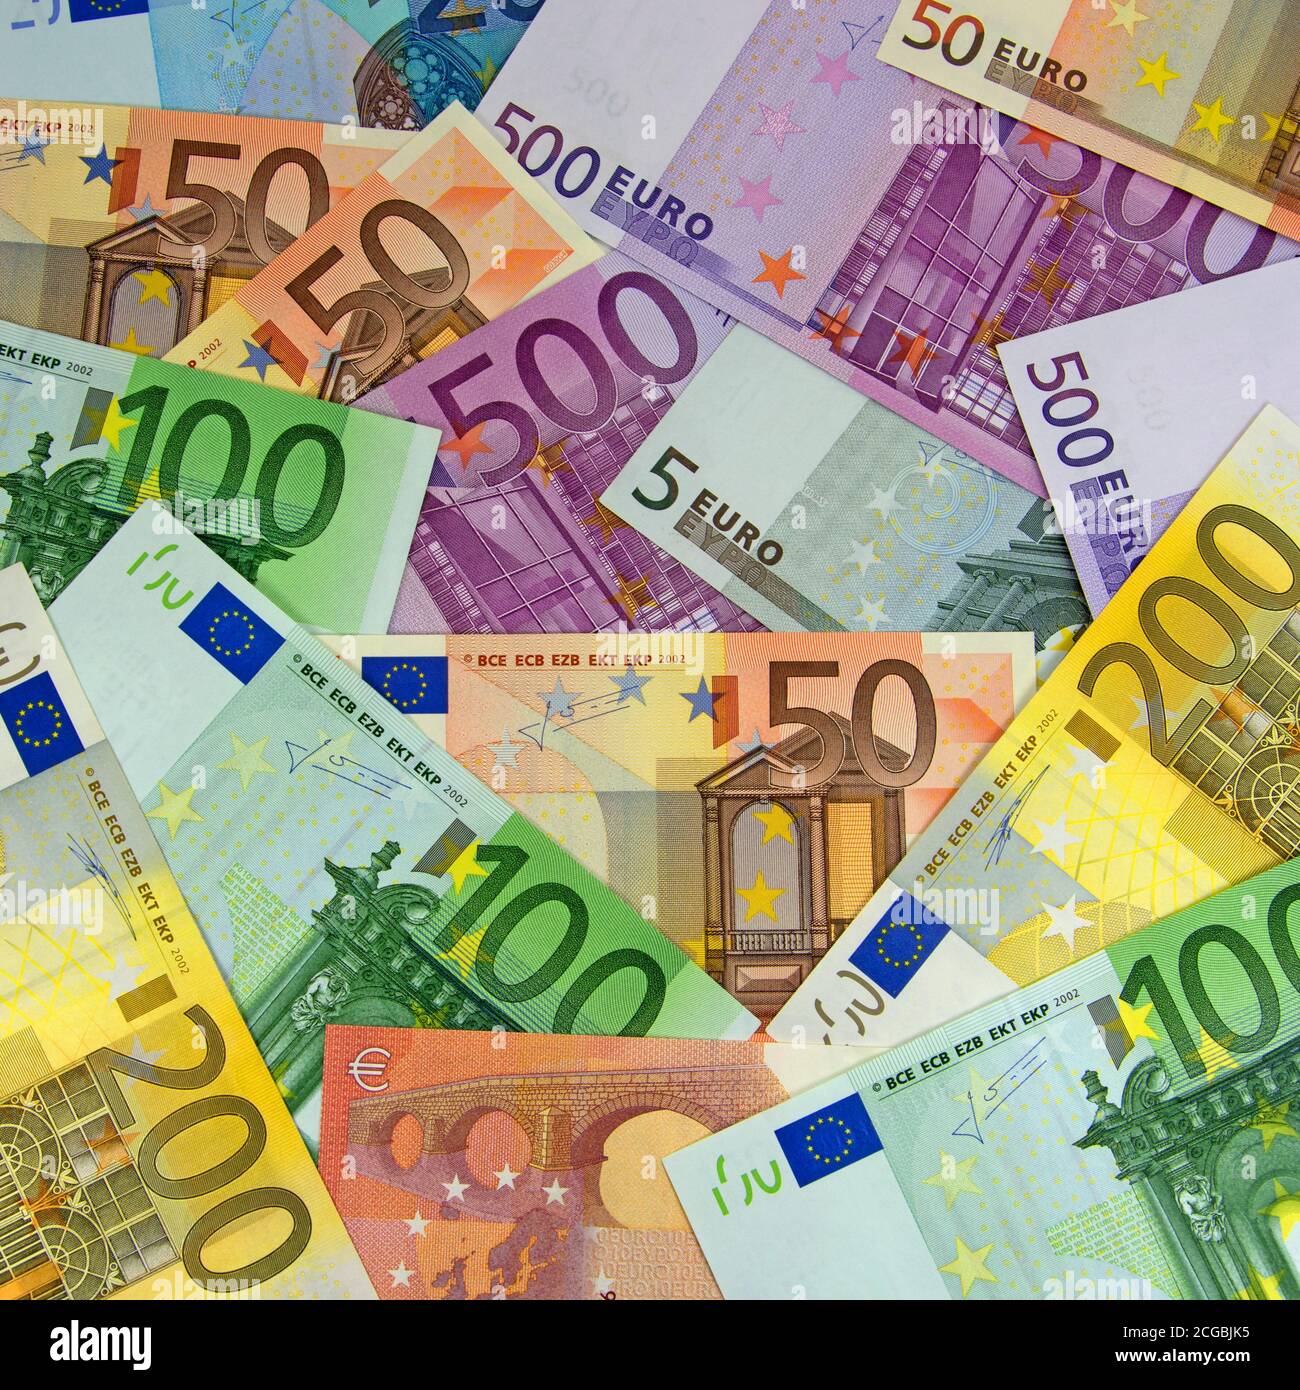 Lots of banknotes in euro currency Stock Photo